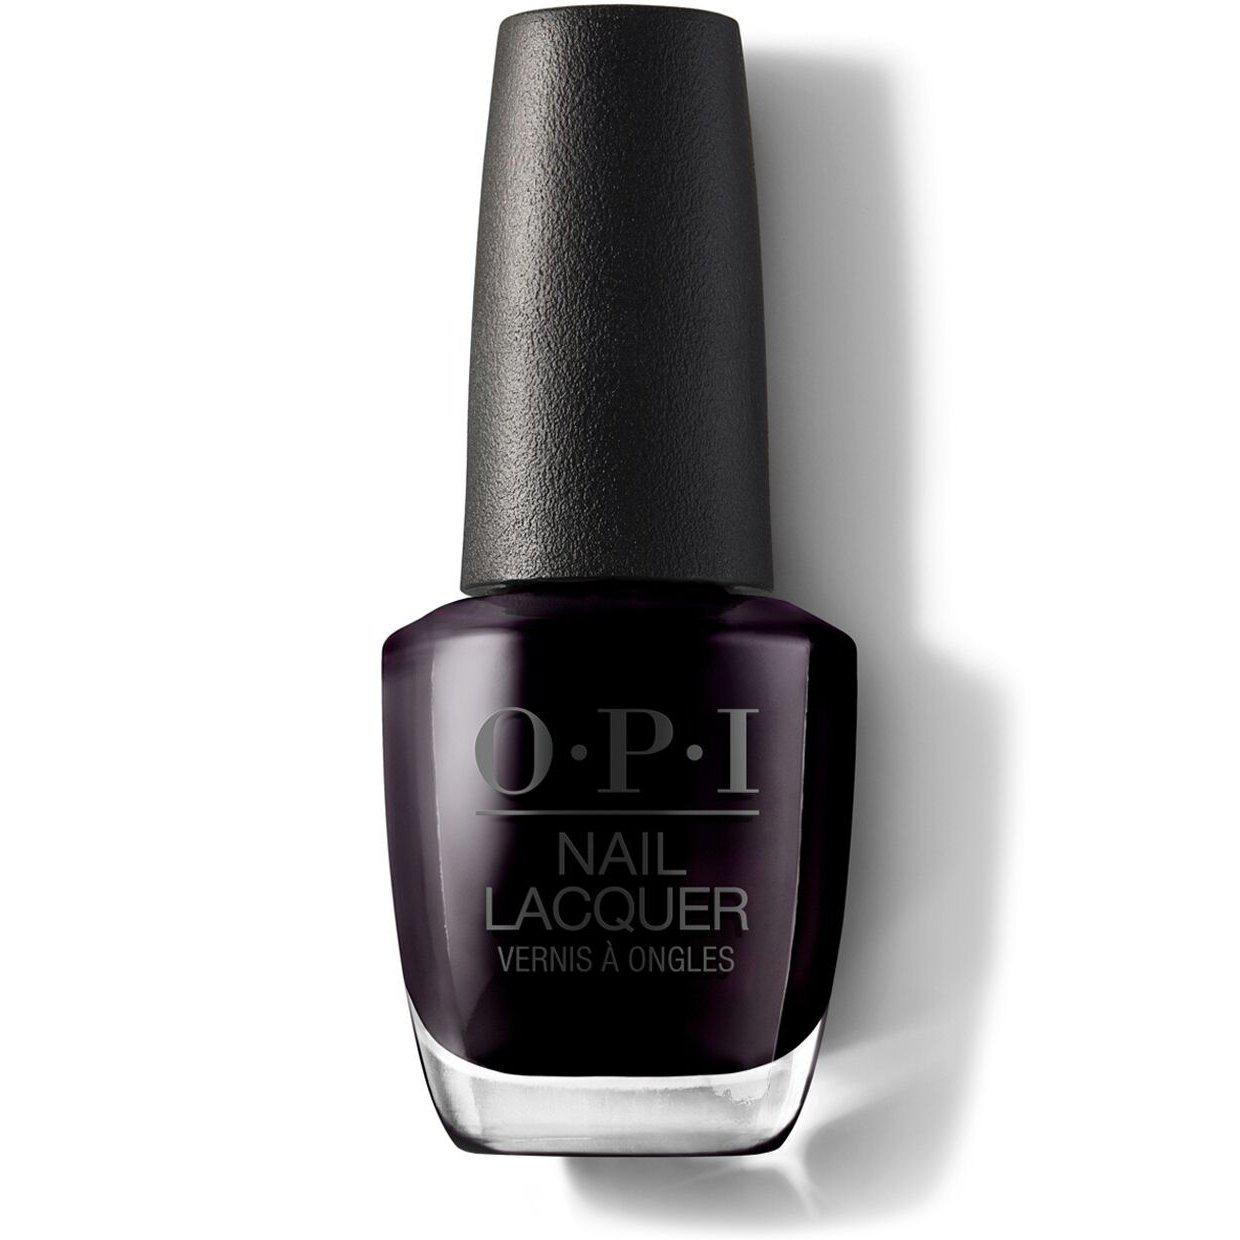 OPI nail lacquer Lincoln Park after Dark